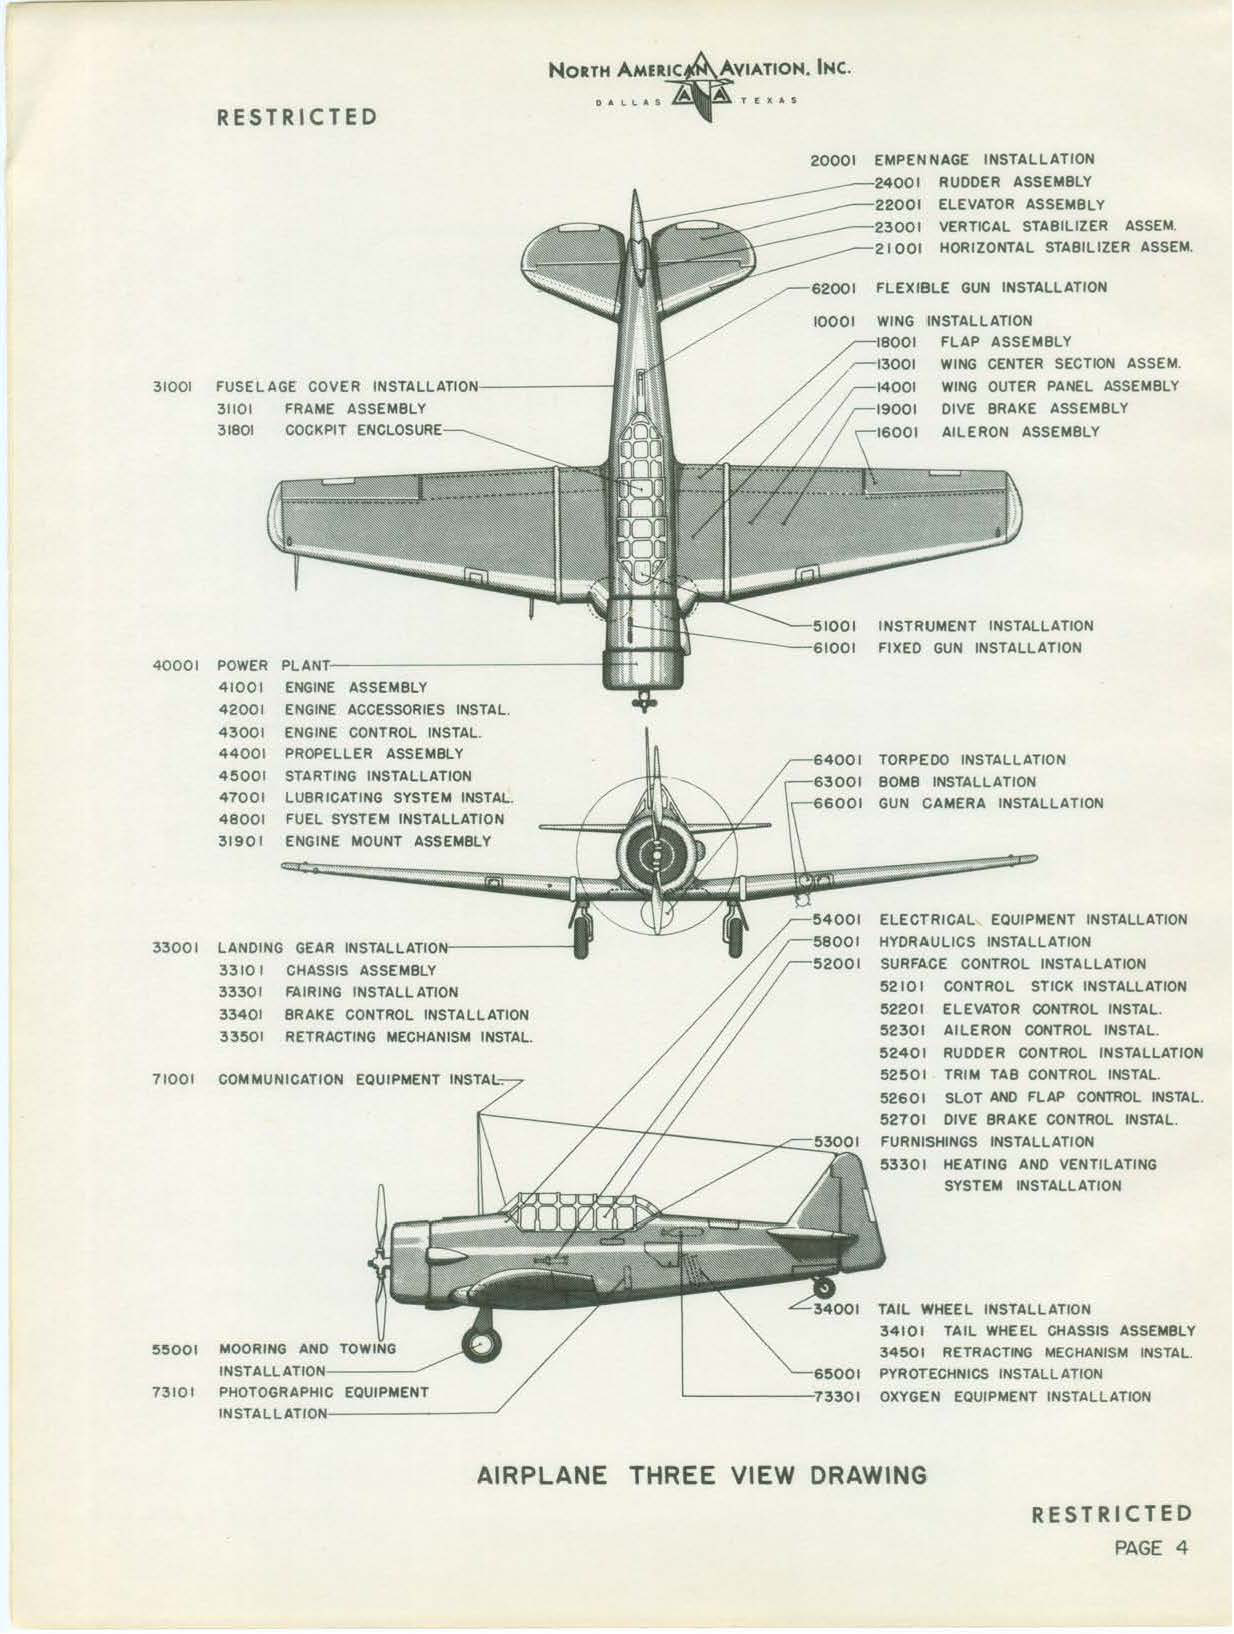 Sample page 8 from AirCorps Library document: Illustrated Parts Catalog for AT-6C, SNJ-4 and AT-6C-15-NT